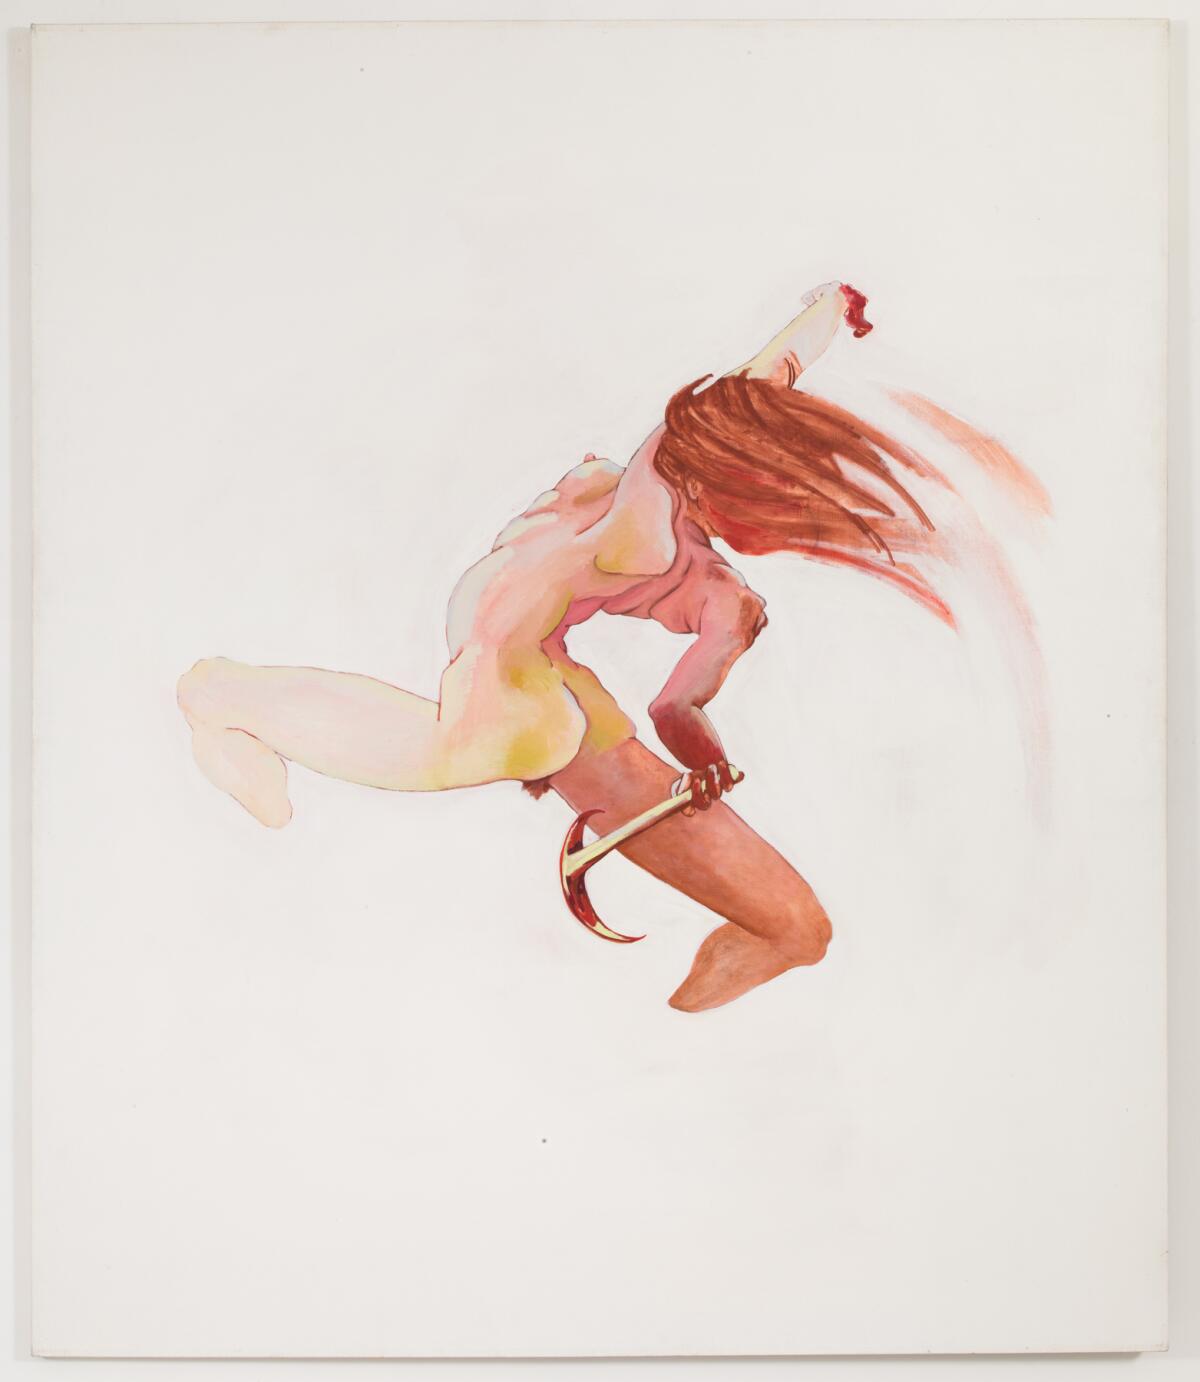 A painting of a nude woman leaping with a pickax.